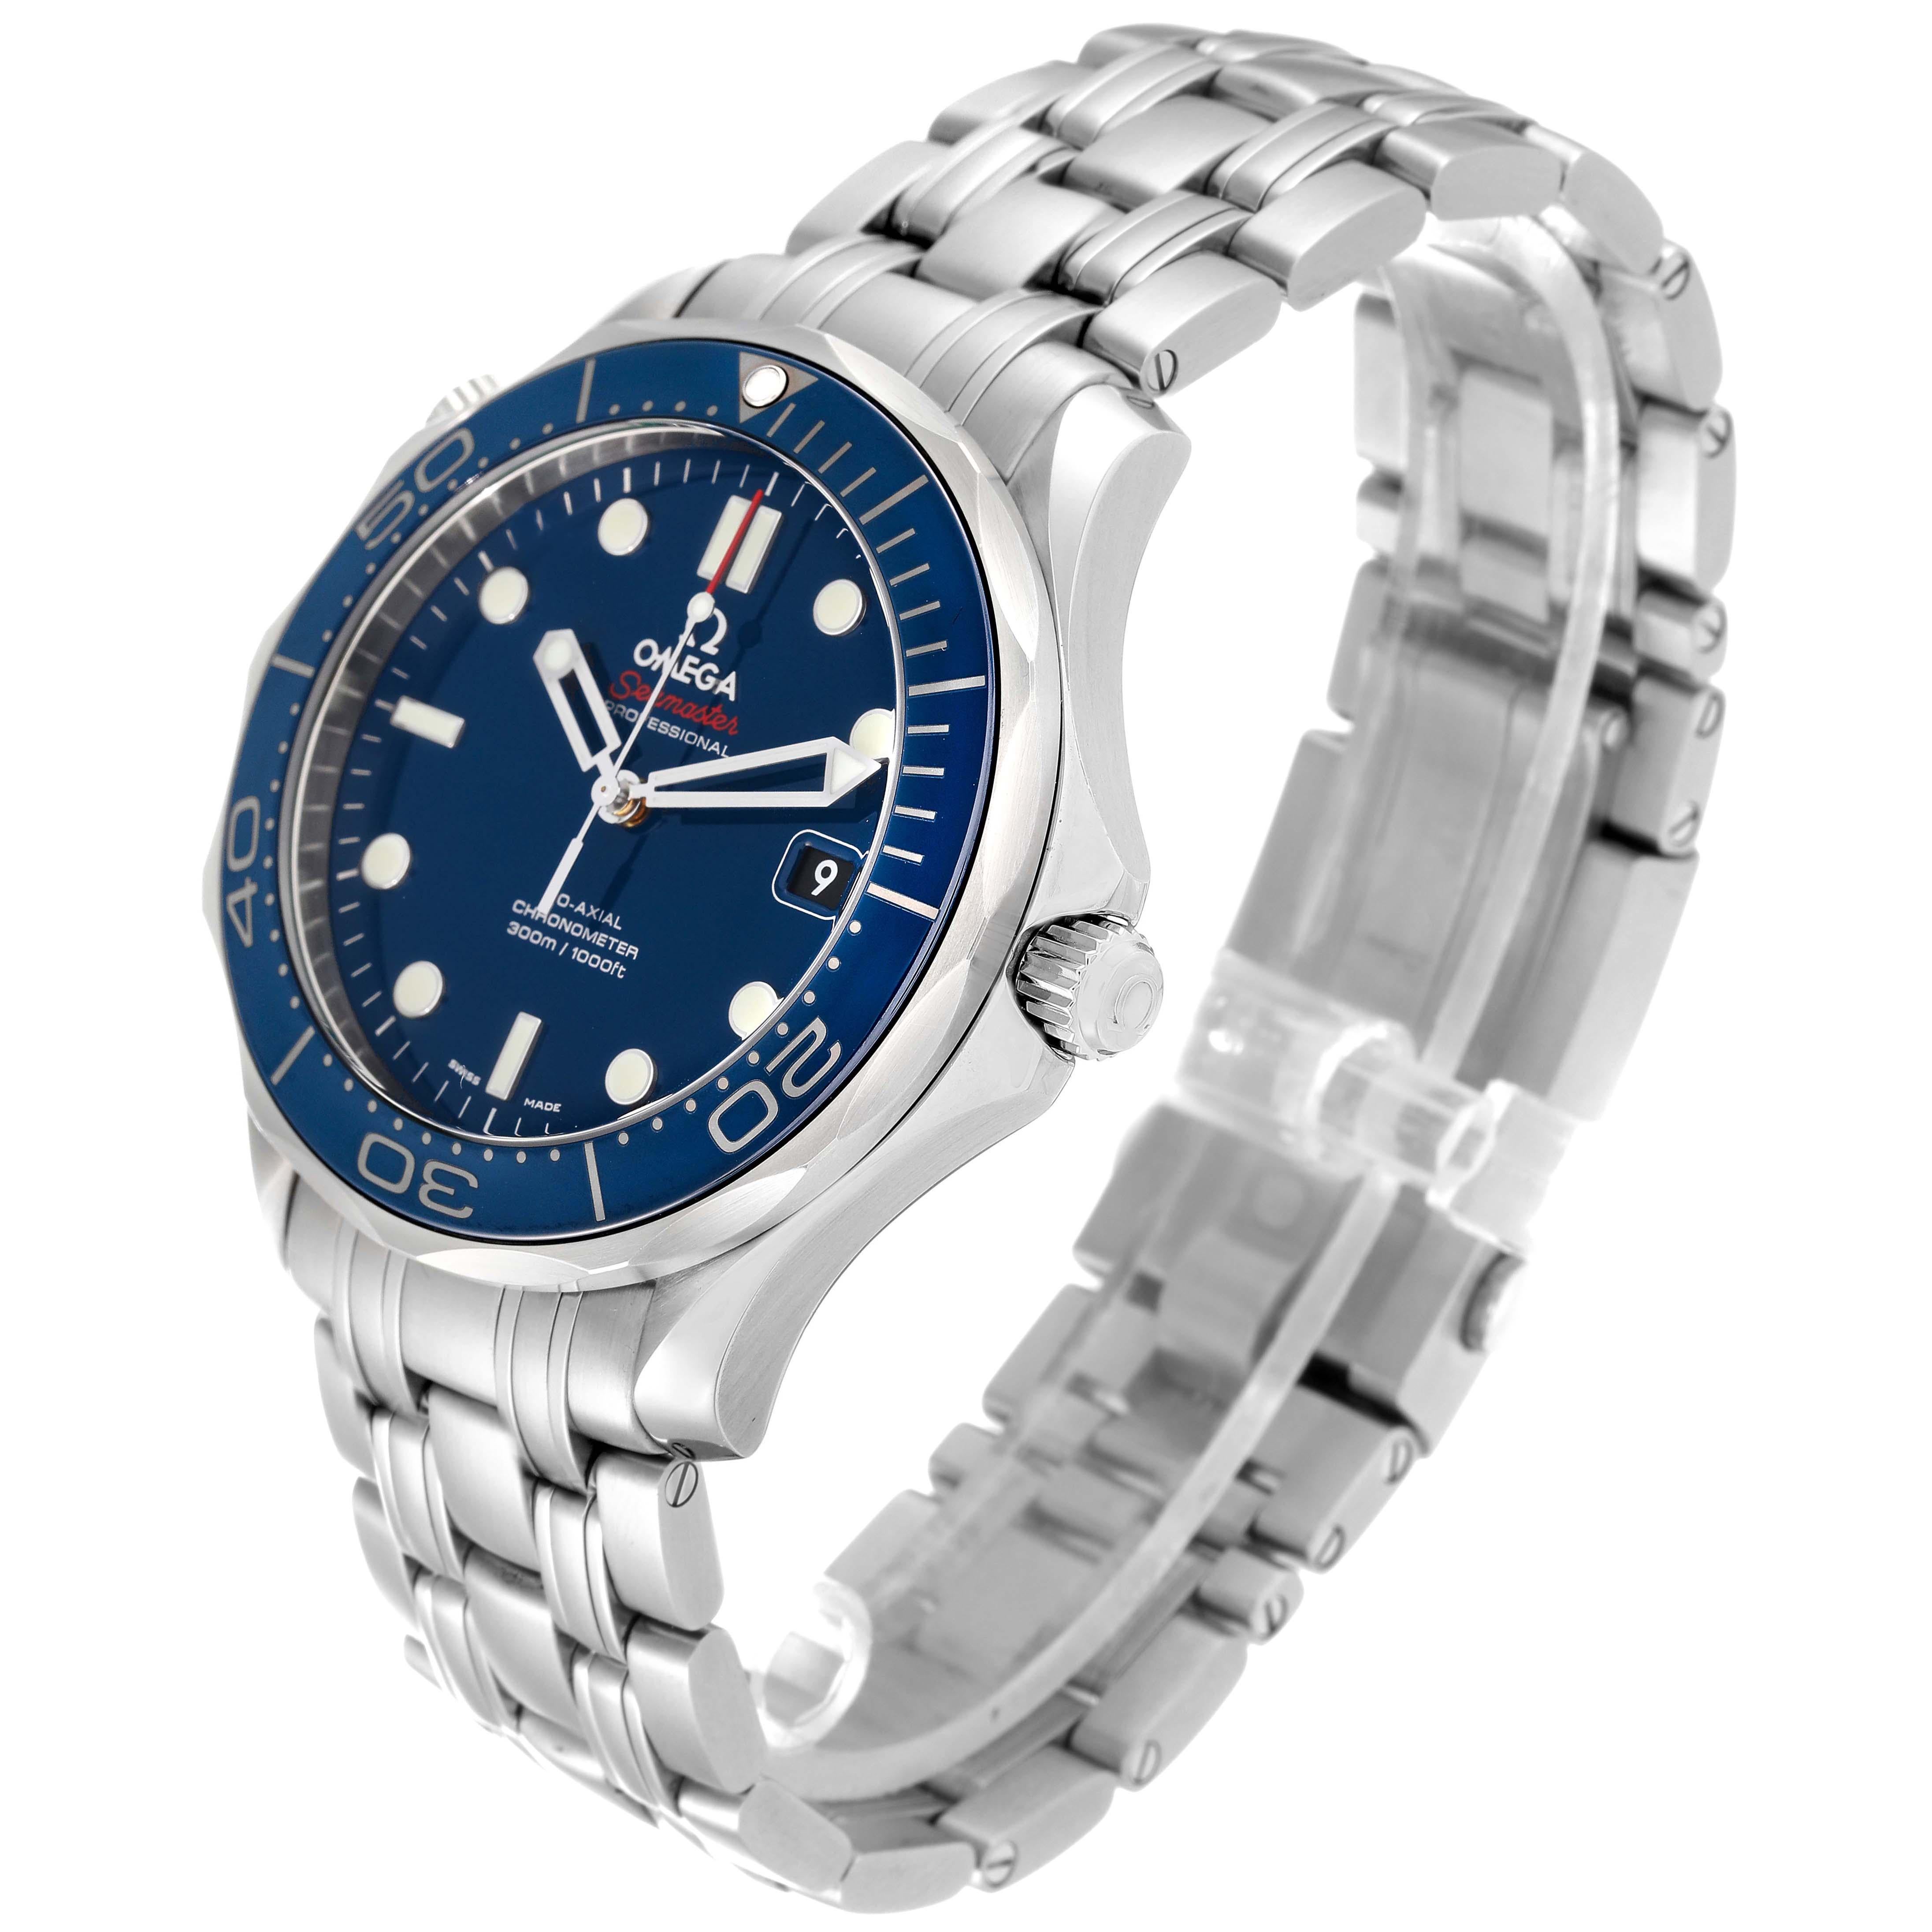 Omega Seamaster Diver 300M Steel Mens Watch 212.30.41.20.03.001 Box Card 1